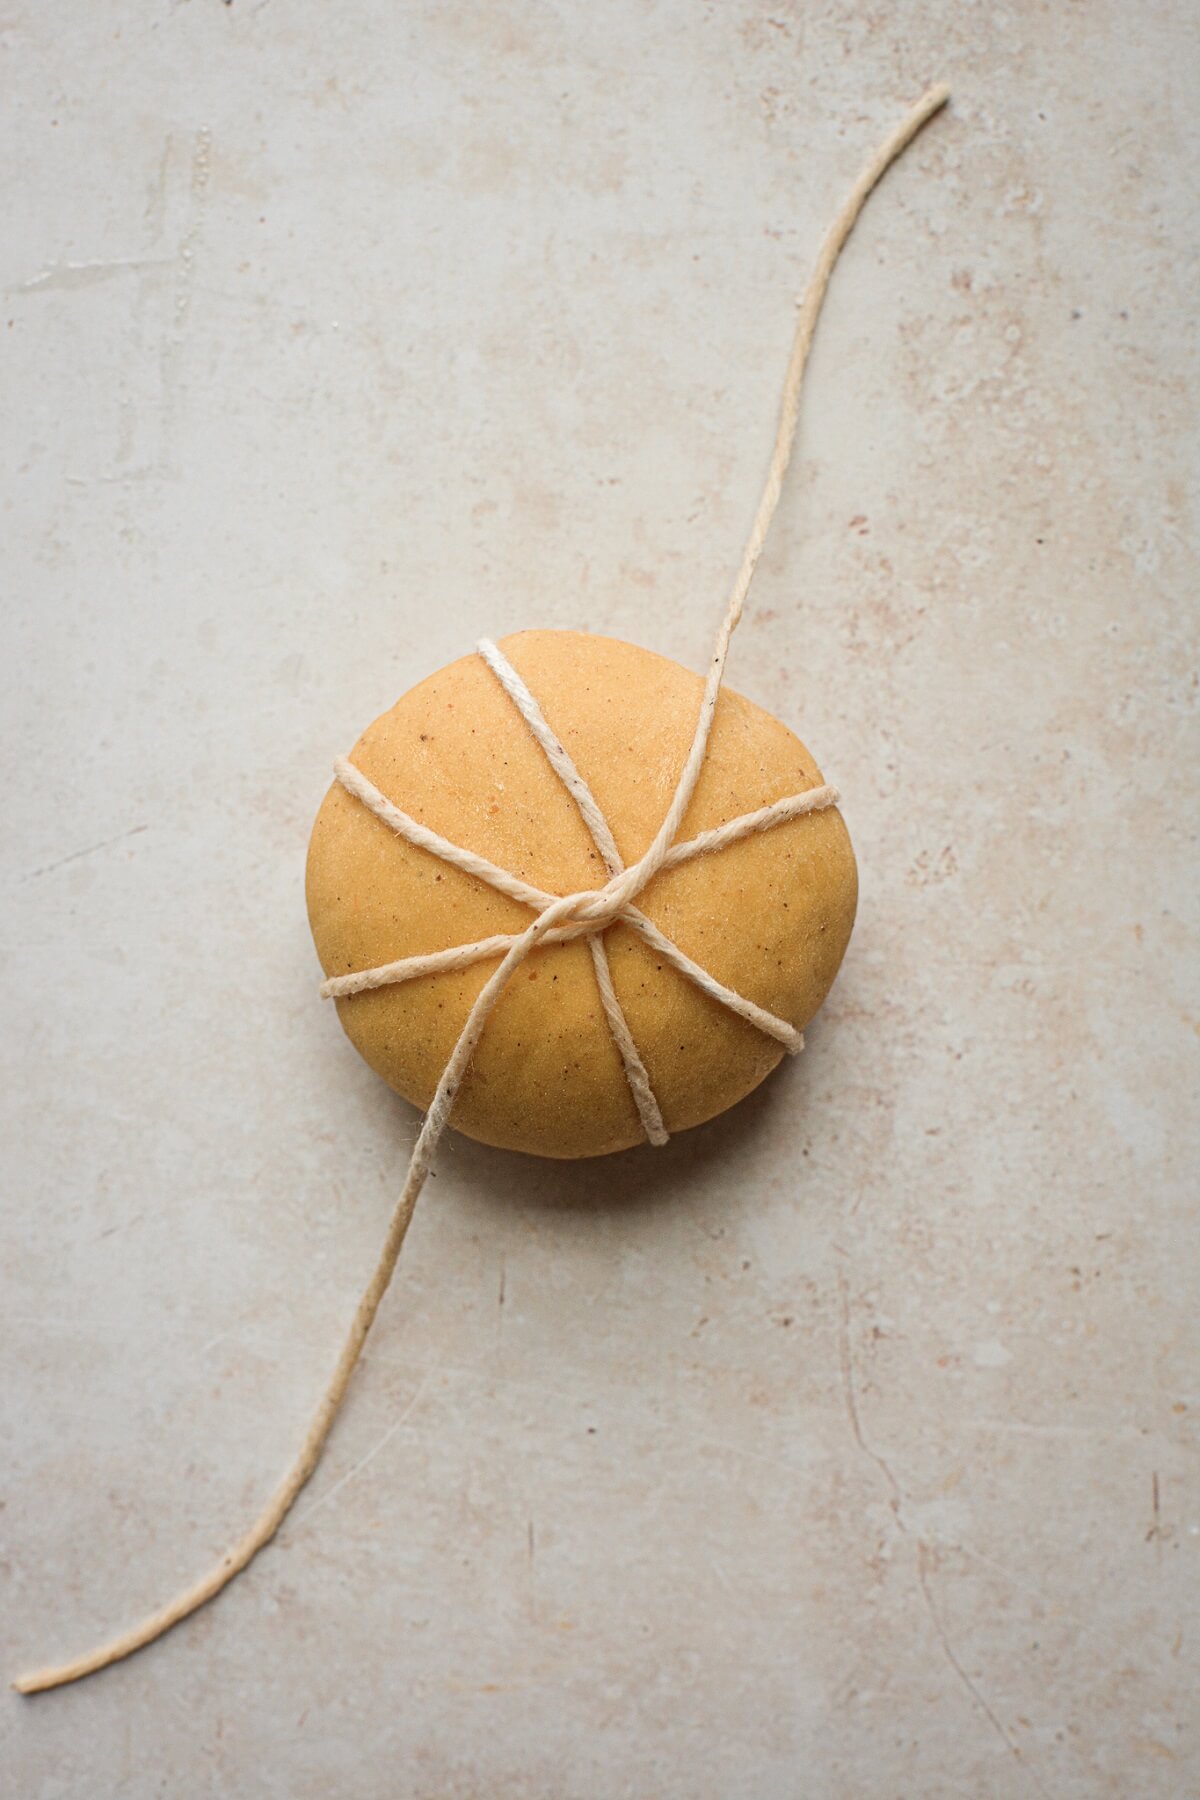 Step 4 for tying pumpkin shaped dinner rolls with twine.